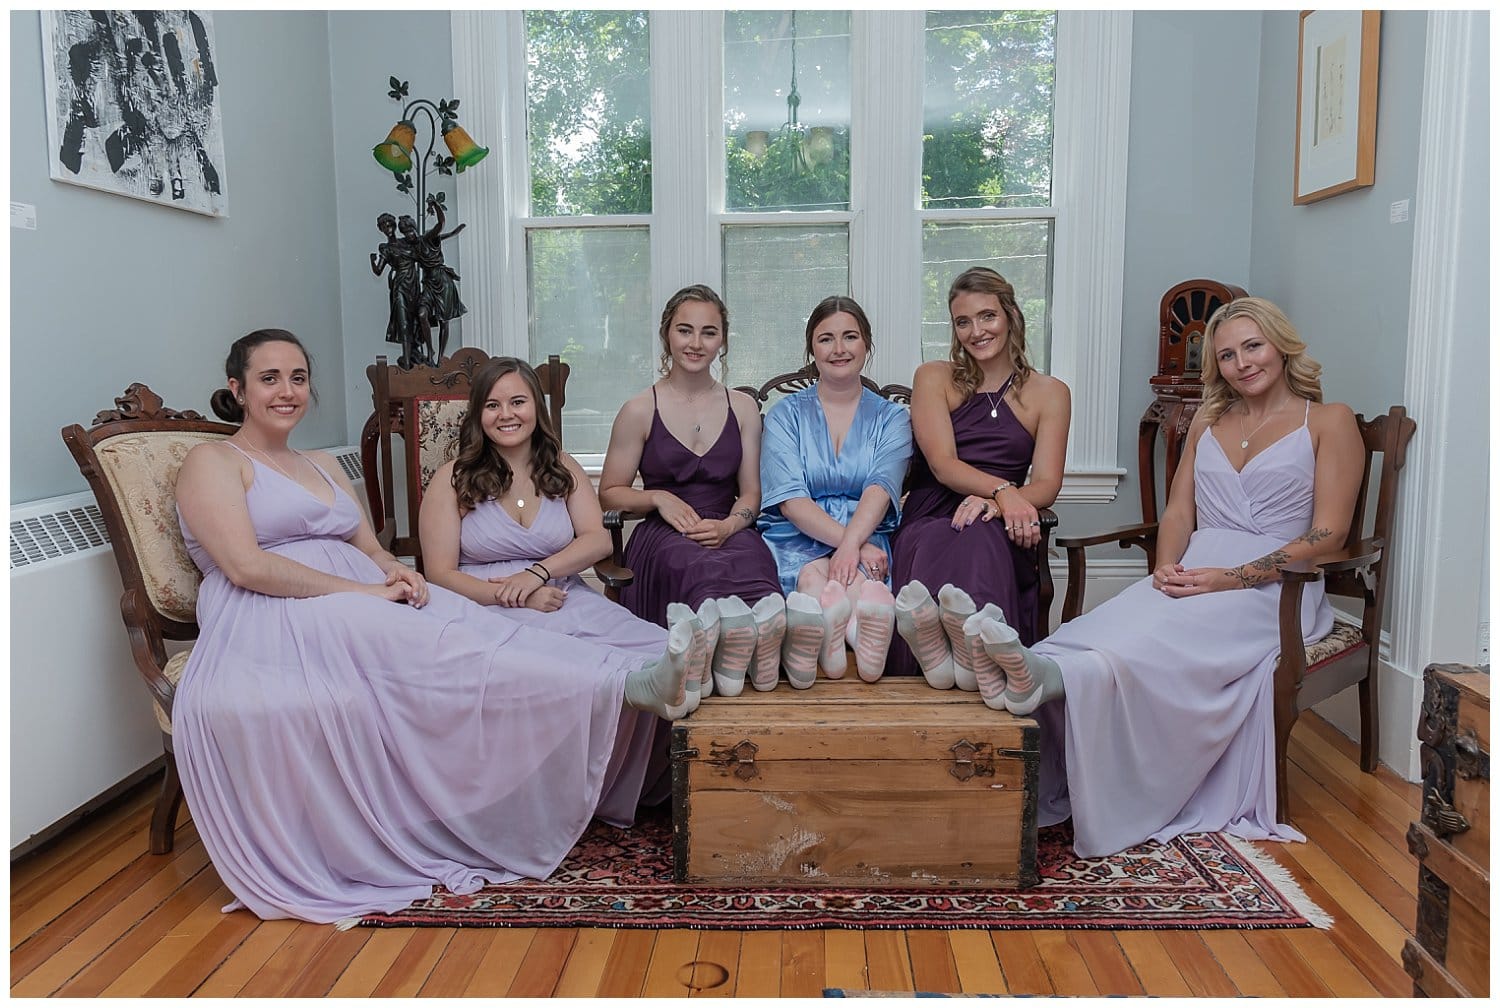 The bride and bridal party where matching bride and bridesmaids socks.